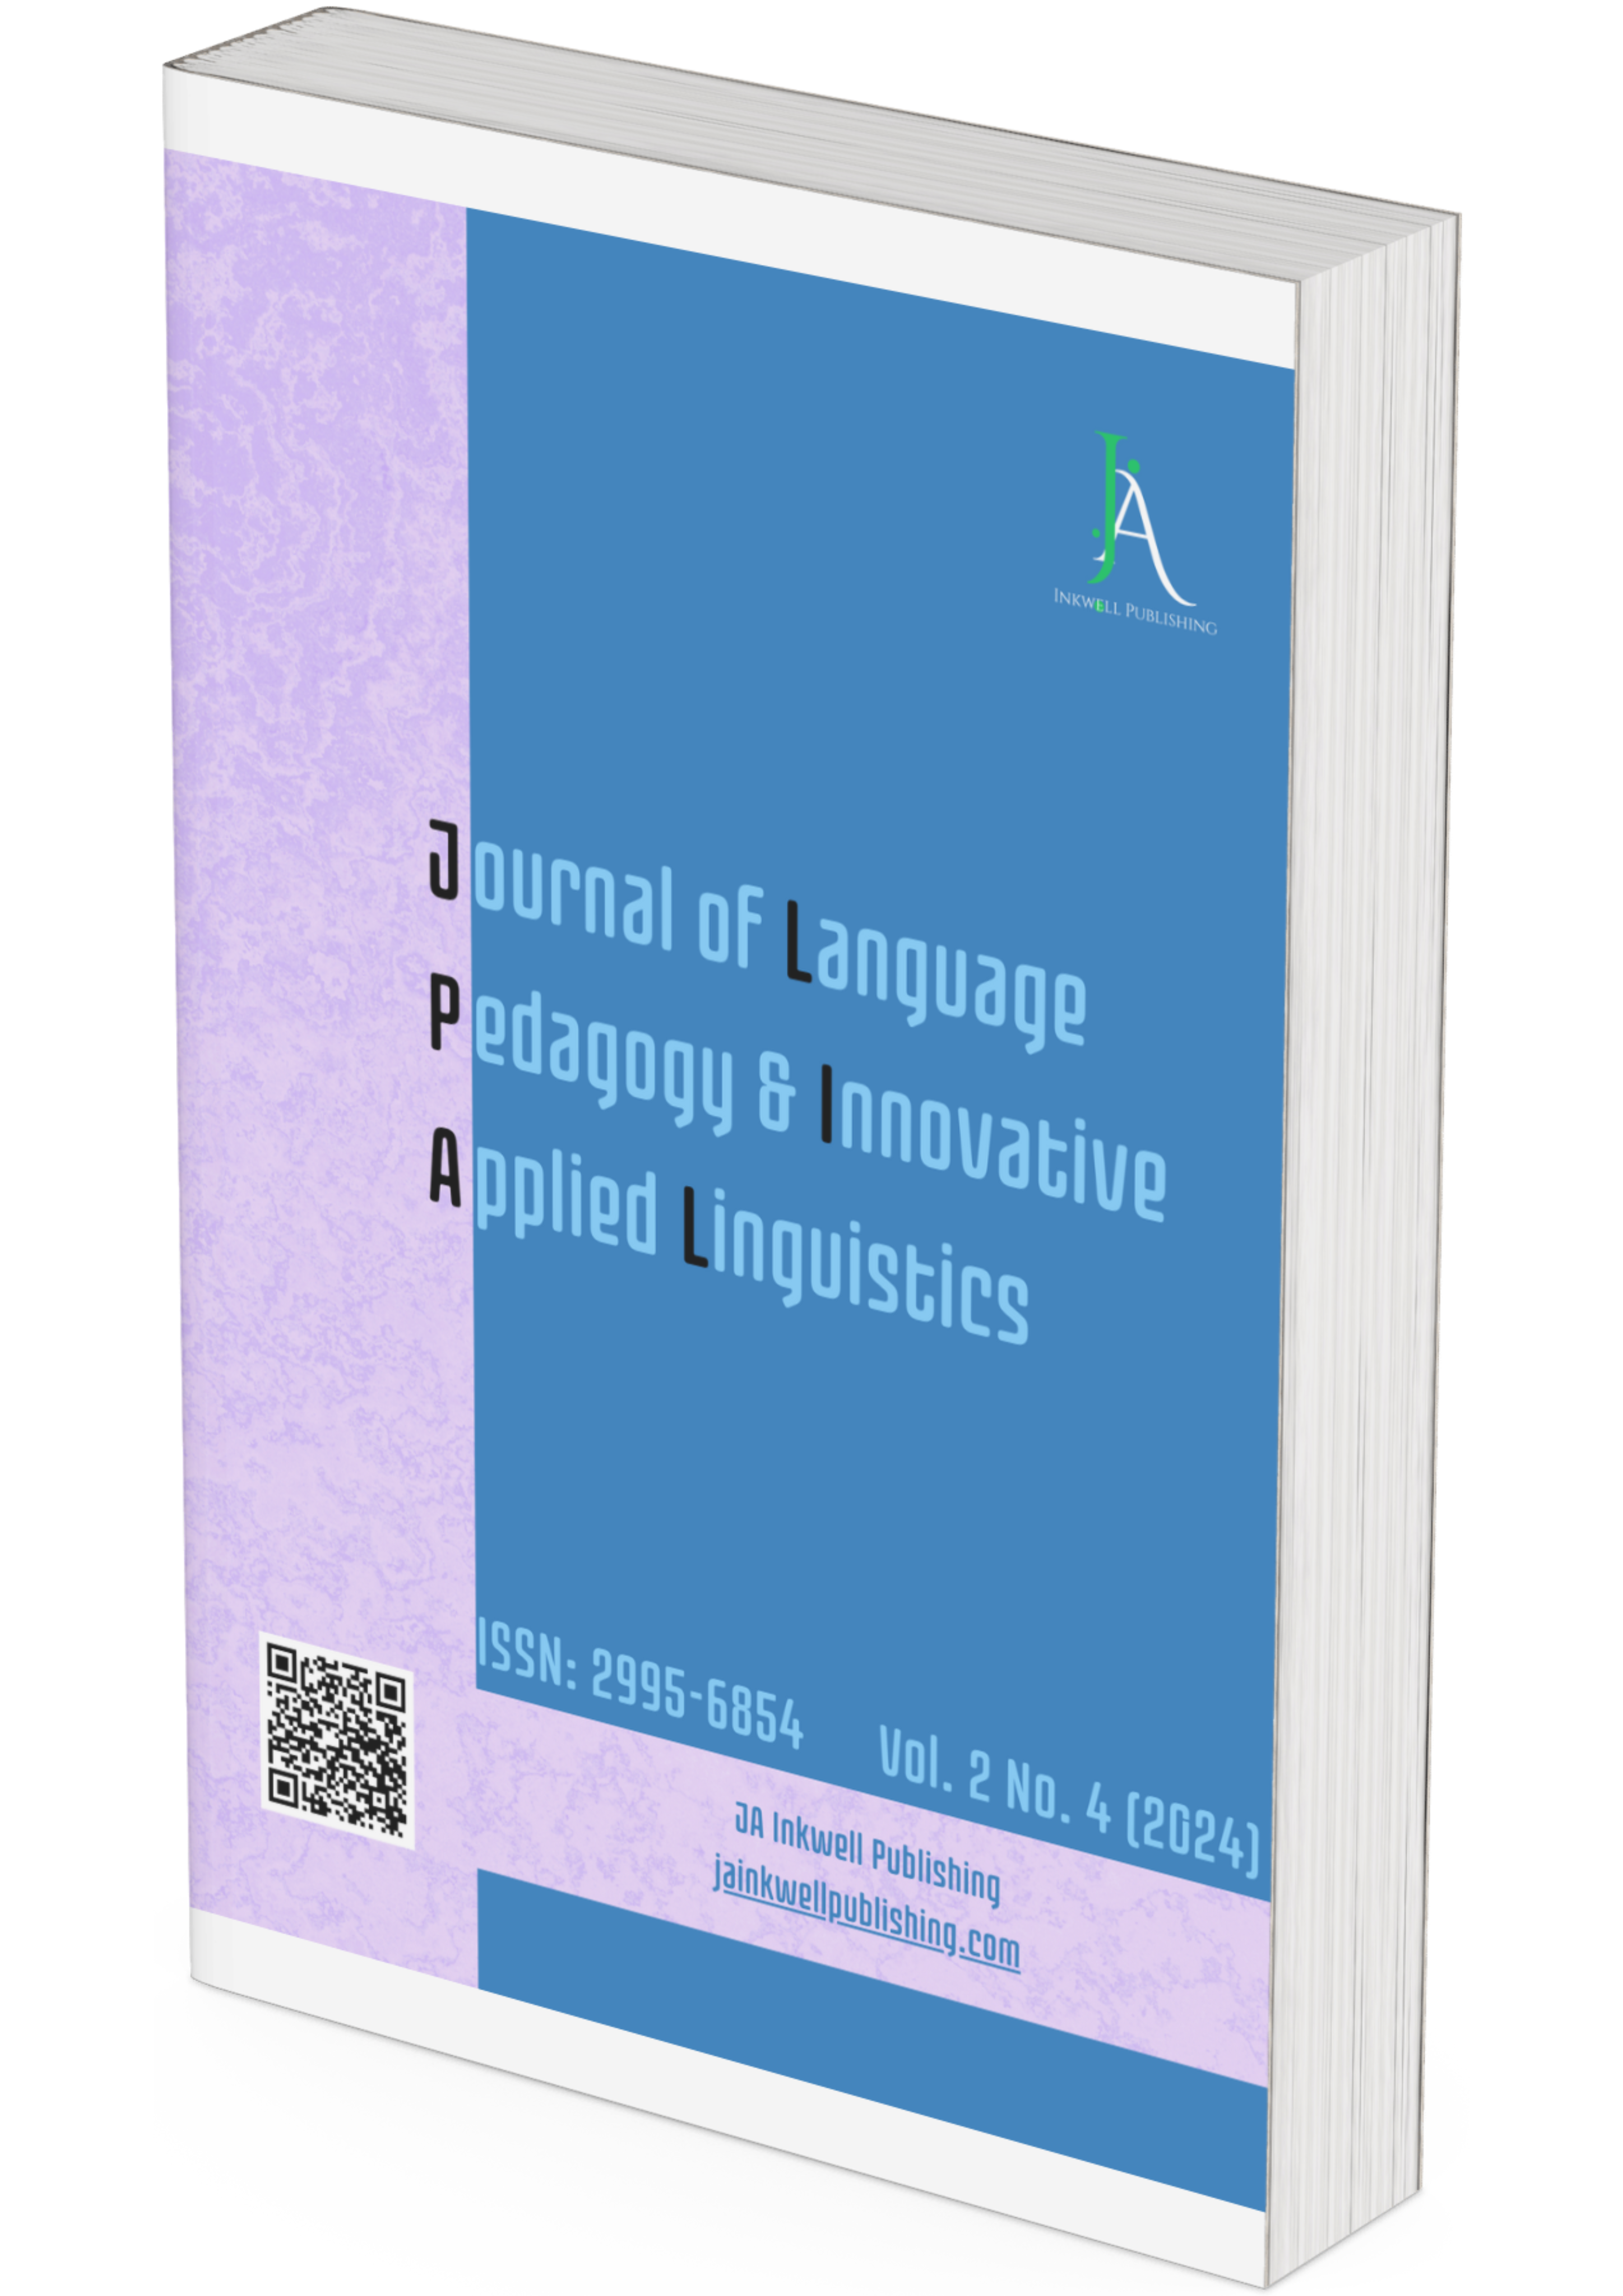 					View Vol. 2 No. 4 (2024): Journal of Language Pedagogy and Innovative Applied Linguistics
				